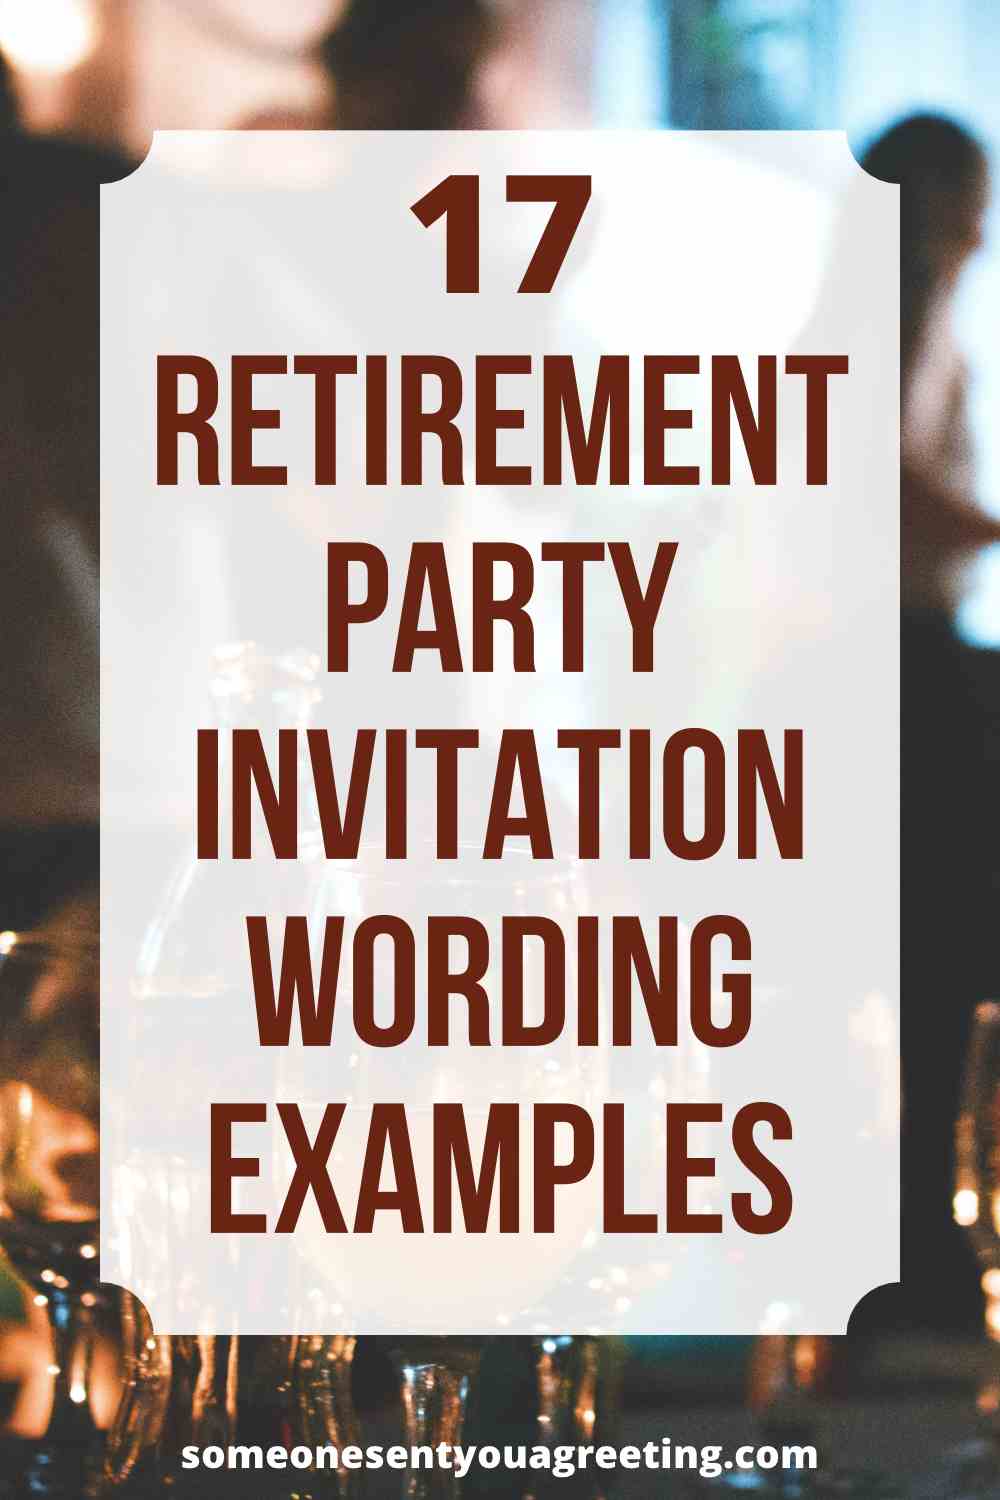 How Do You Write A Retirement Party Invitation